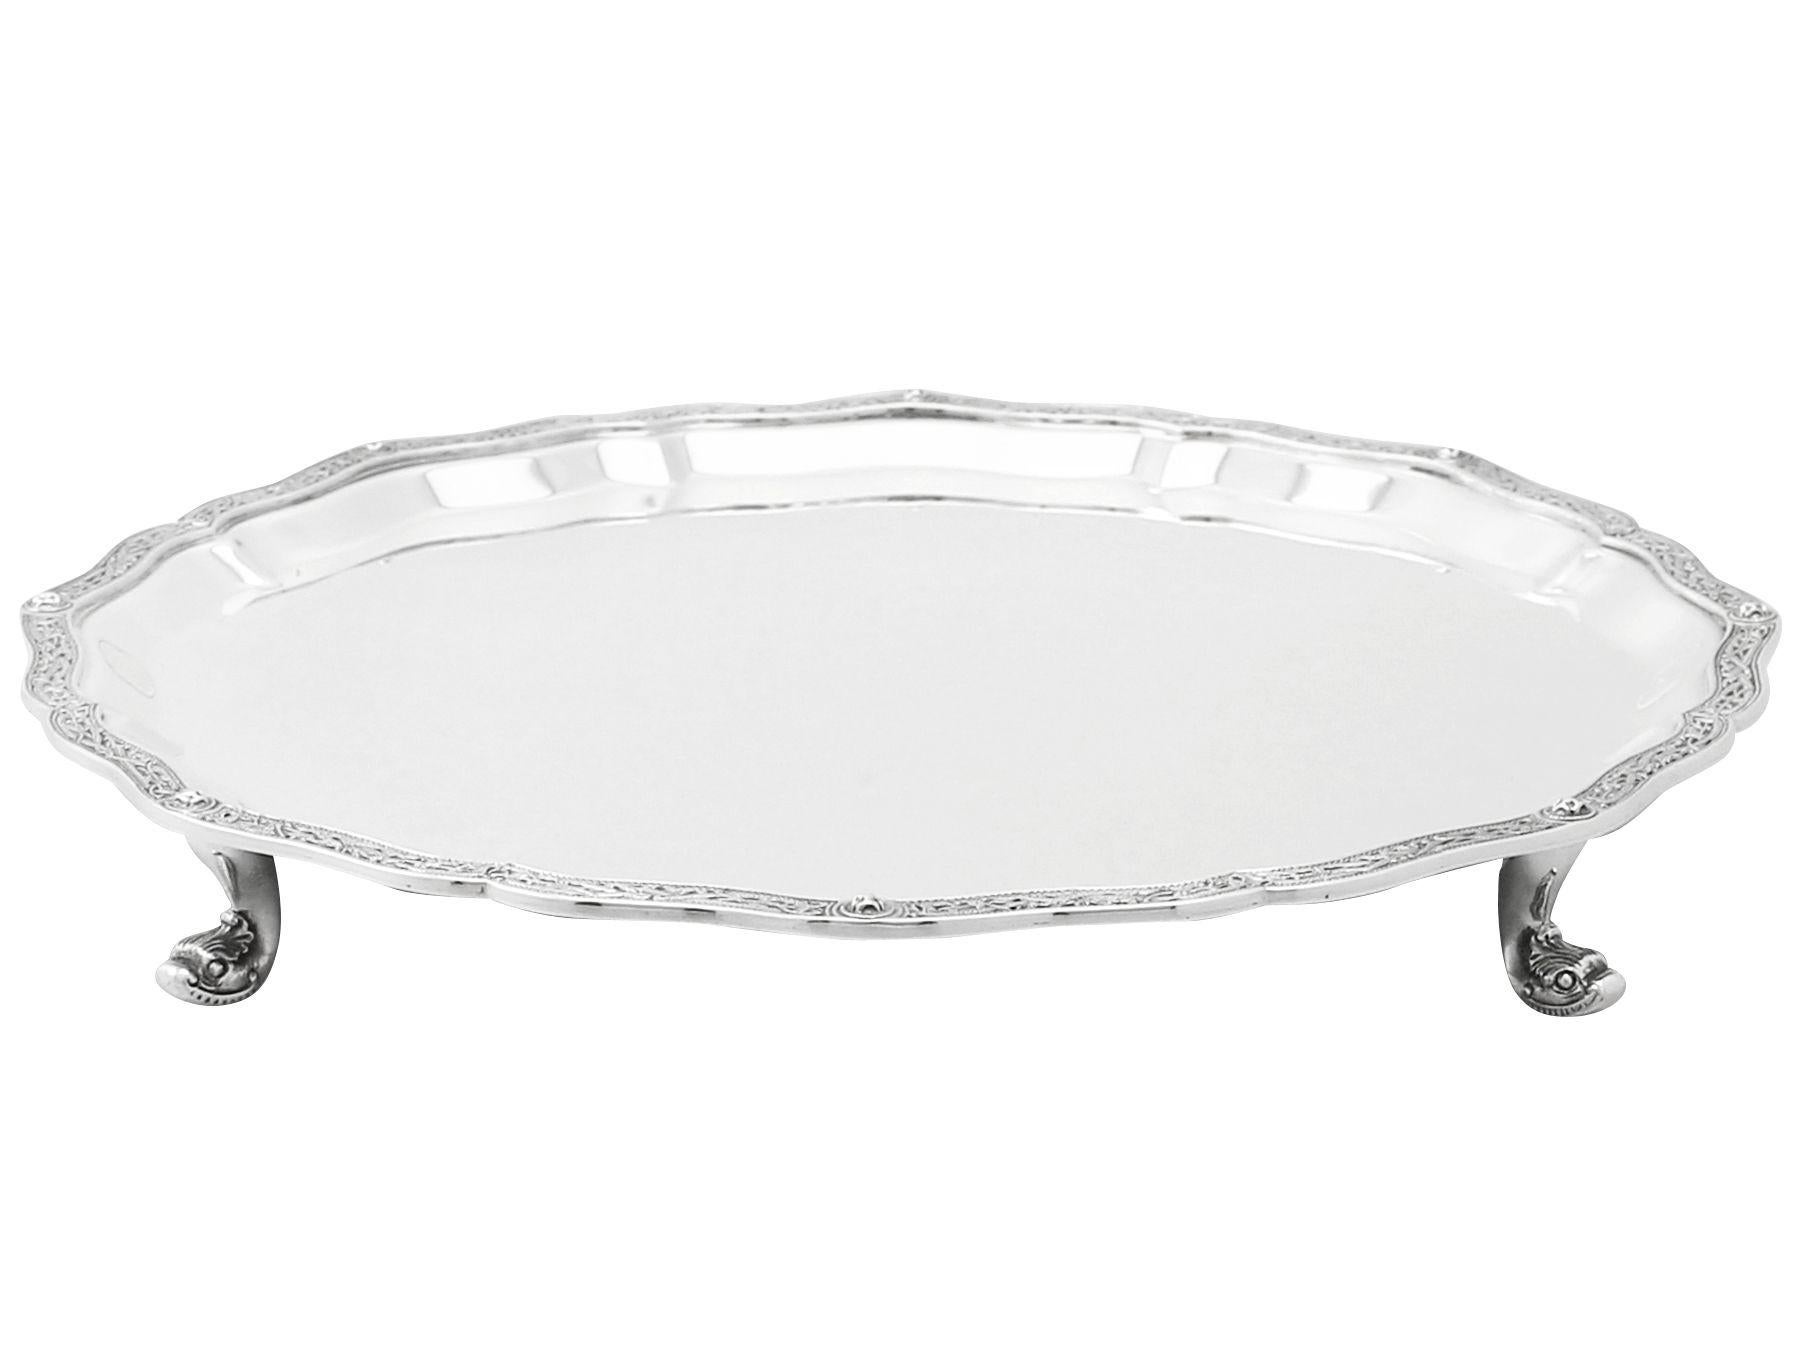 An exceptional, fine and impressive vintage Elizabeth II English sterling silver salver in the Lindisfarne style; an addition to our dining silverware collection.

This exceptional vintage Elizabeth II sterling silver salver has a plain circular